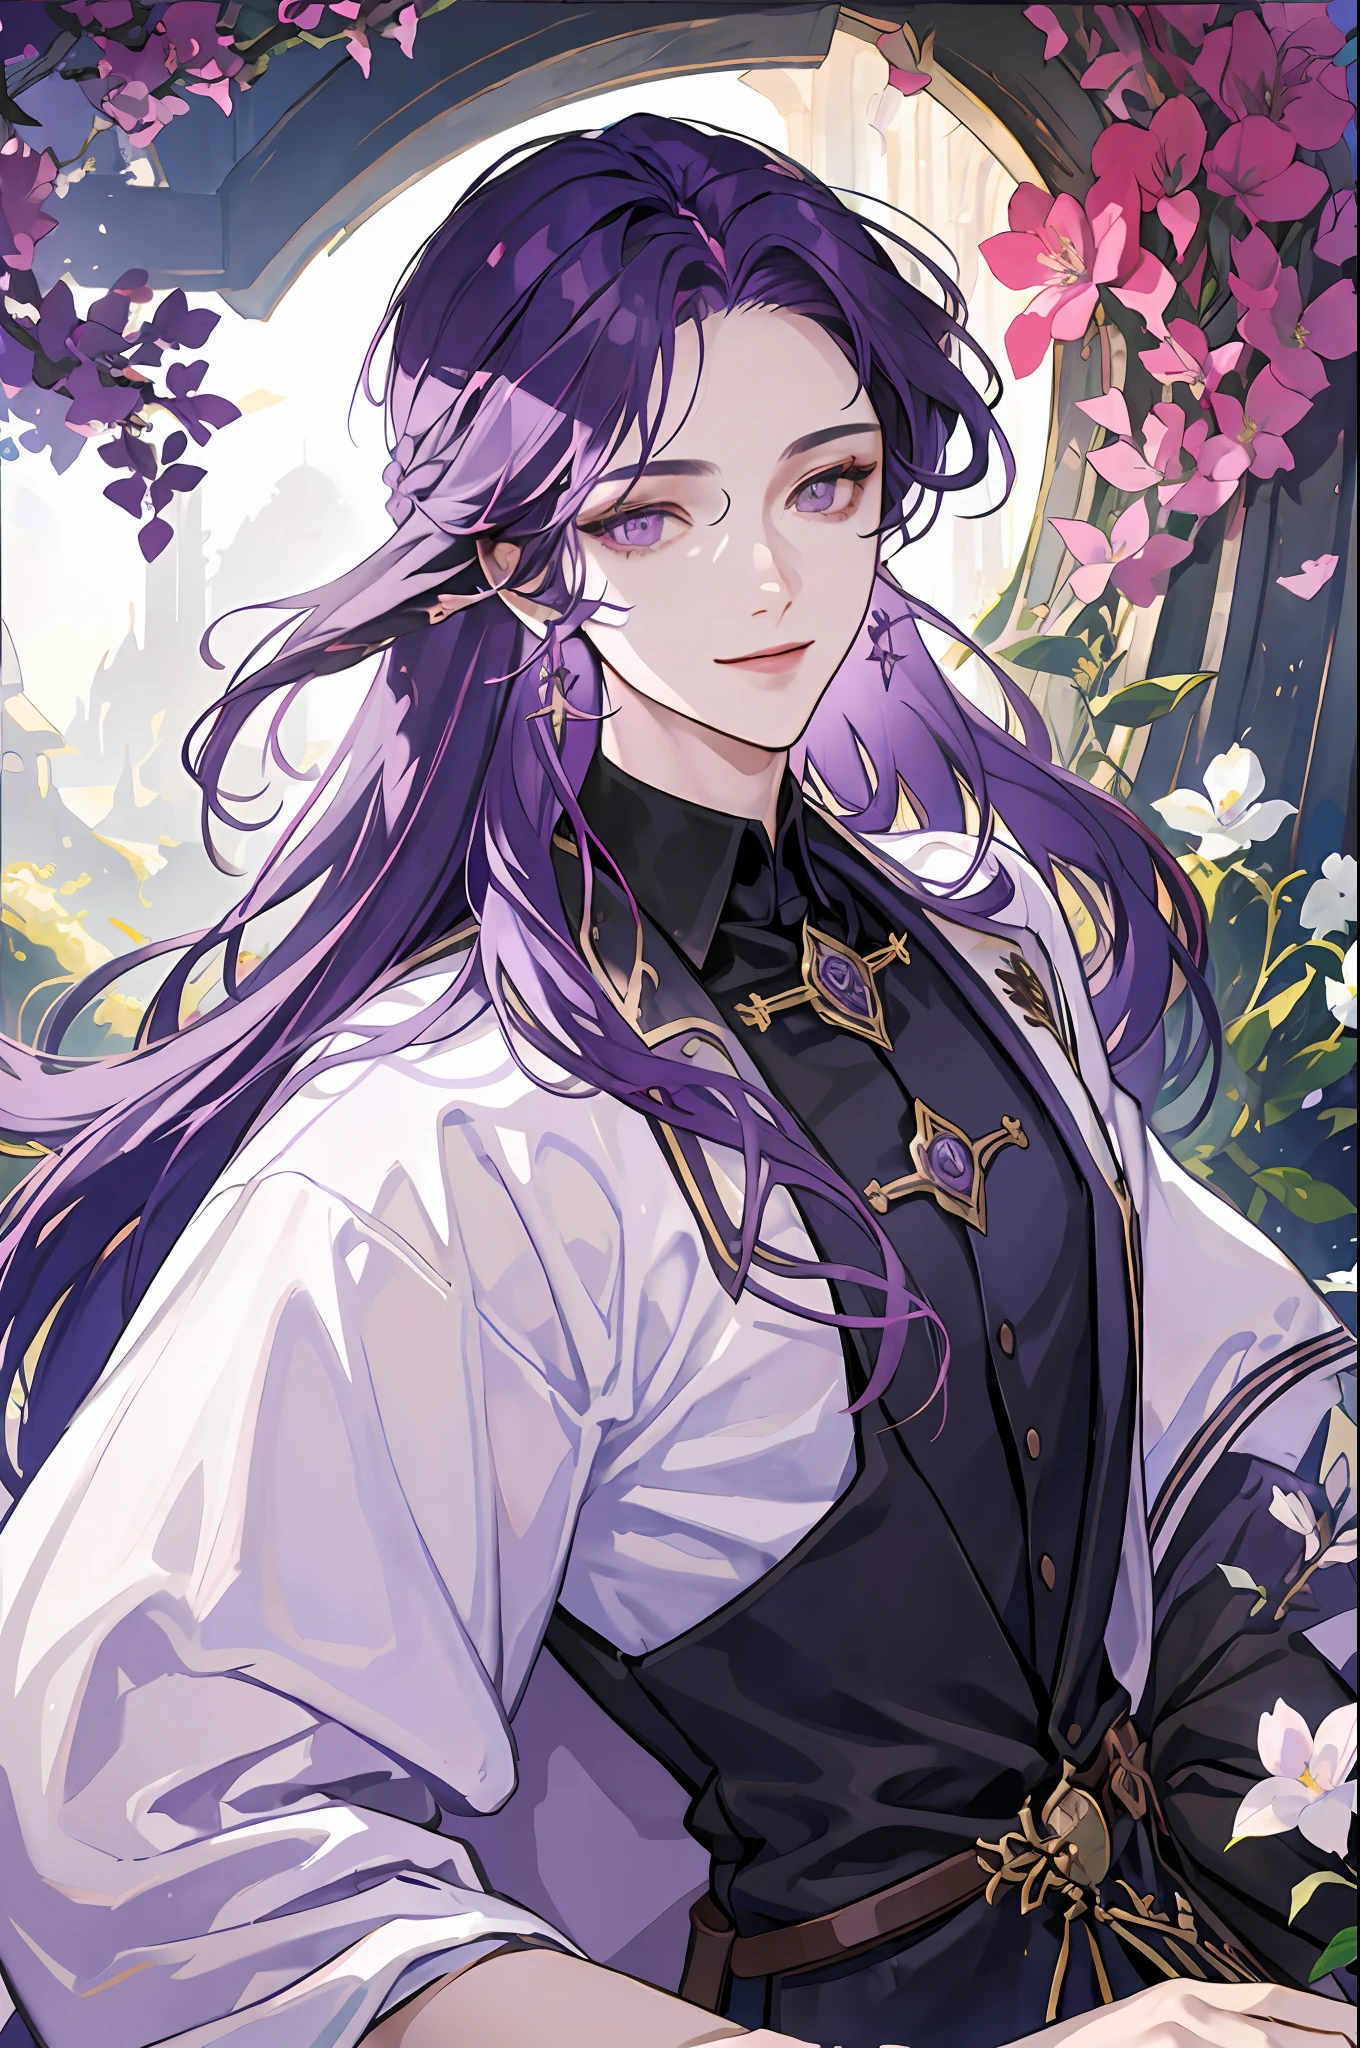 ((masterpiece: 1.2, best quality)), 1 man, long purple hair, purple eyes (handsome: 1.4), white suit, fantasy, uniform, royalty, forest, blooming flowers, sunlight, fantastic light and shadow , landscape, extremely detailed face, portrait, smile, red earrings, wizard, archmage